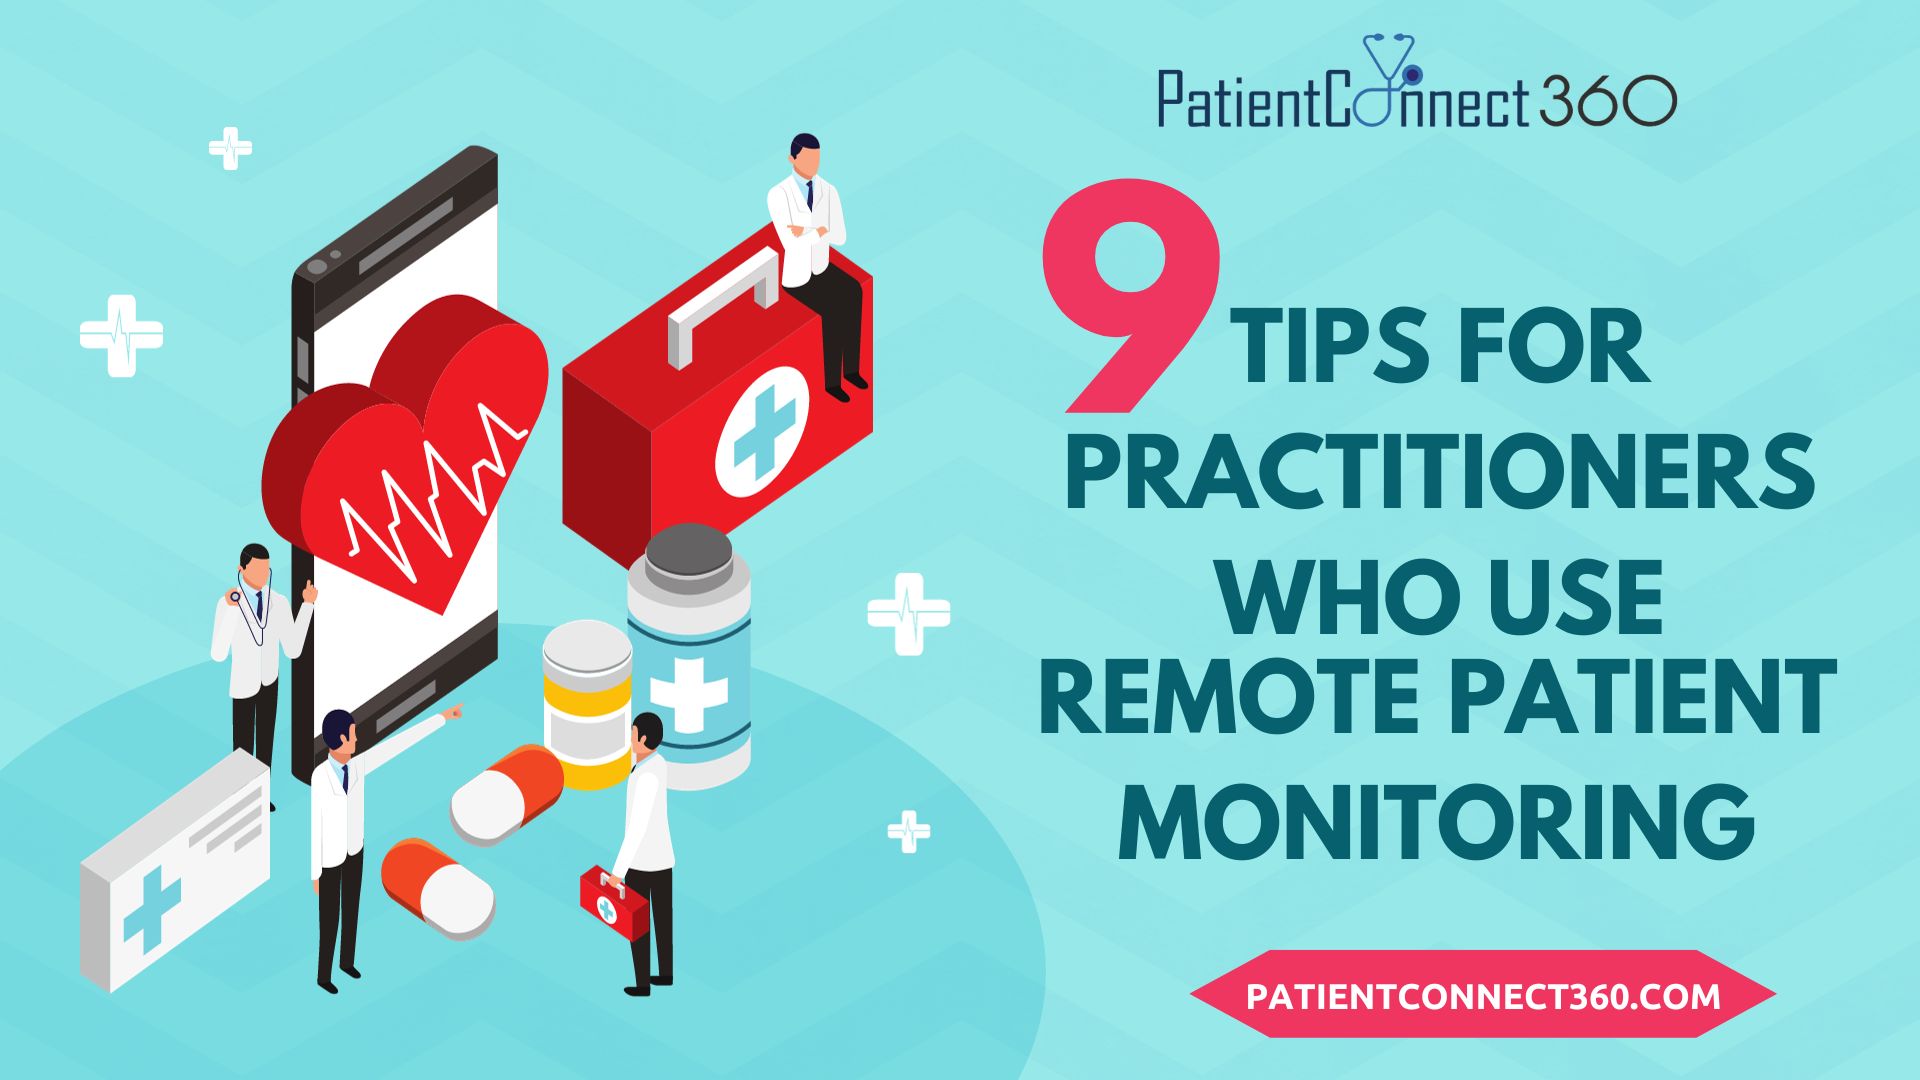 PatientCoAnect 360

OQ. FOR

PRACTITIONERS
WHO USE
REMOTE PATIENT
MONITORING